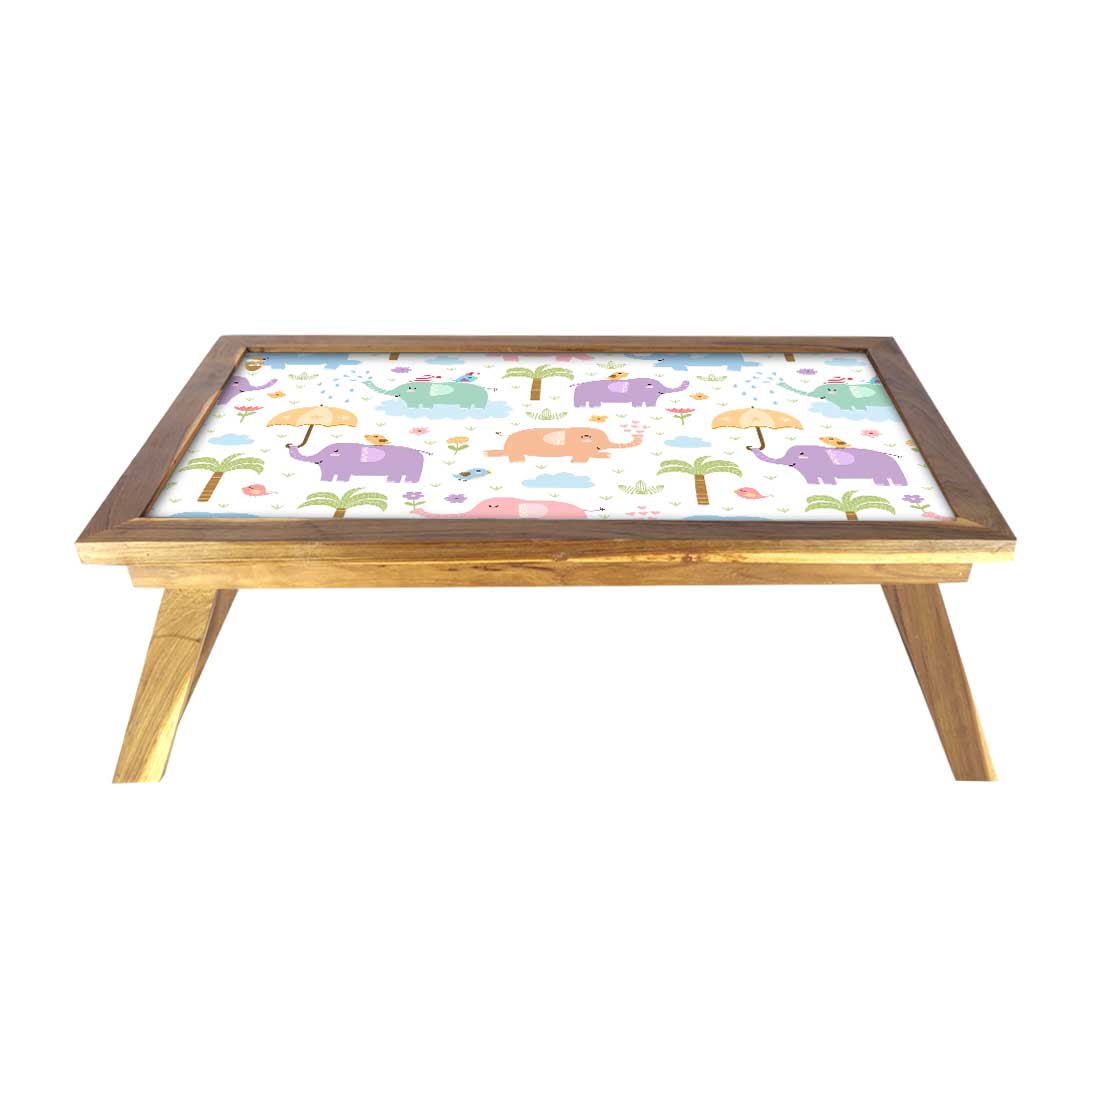 Wooden Tray Table for Bed Breakfast Tables Study Desk - Cute Elephant Nutcase